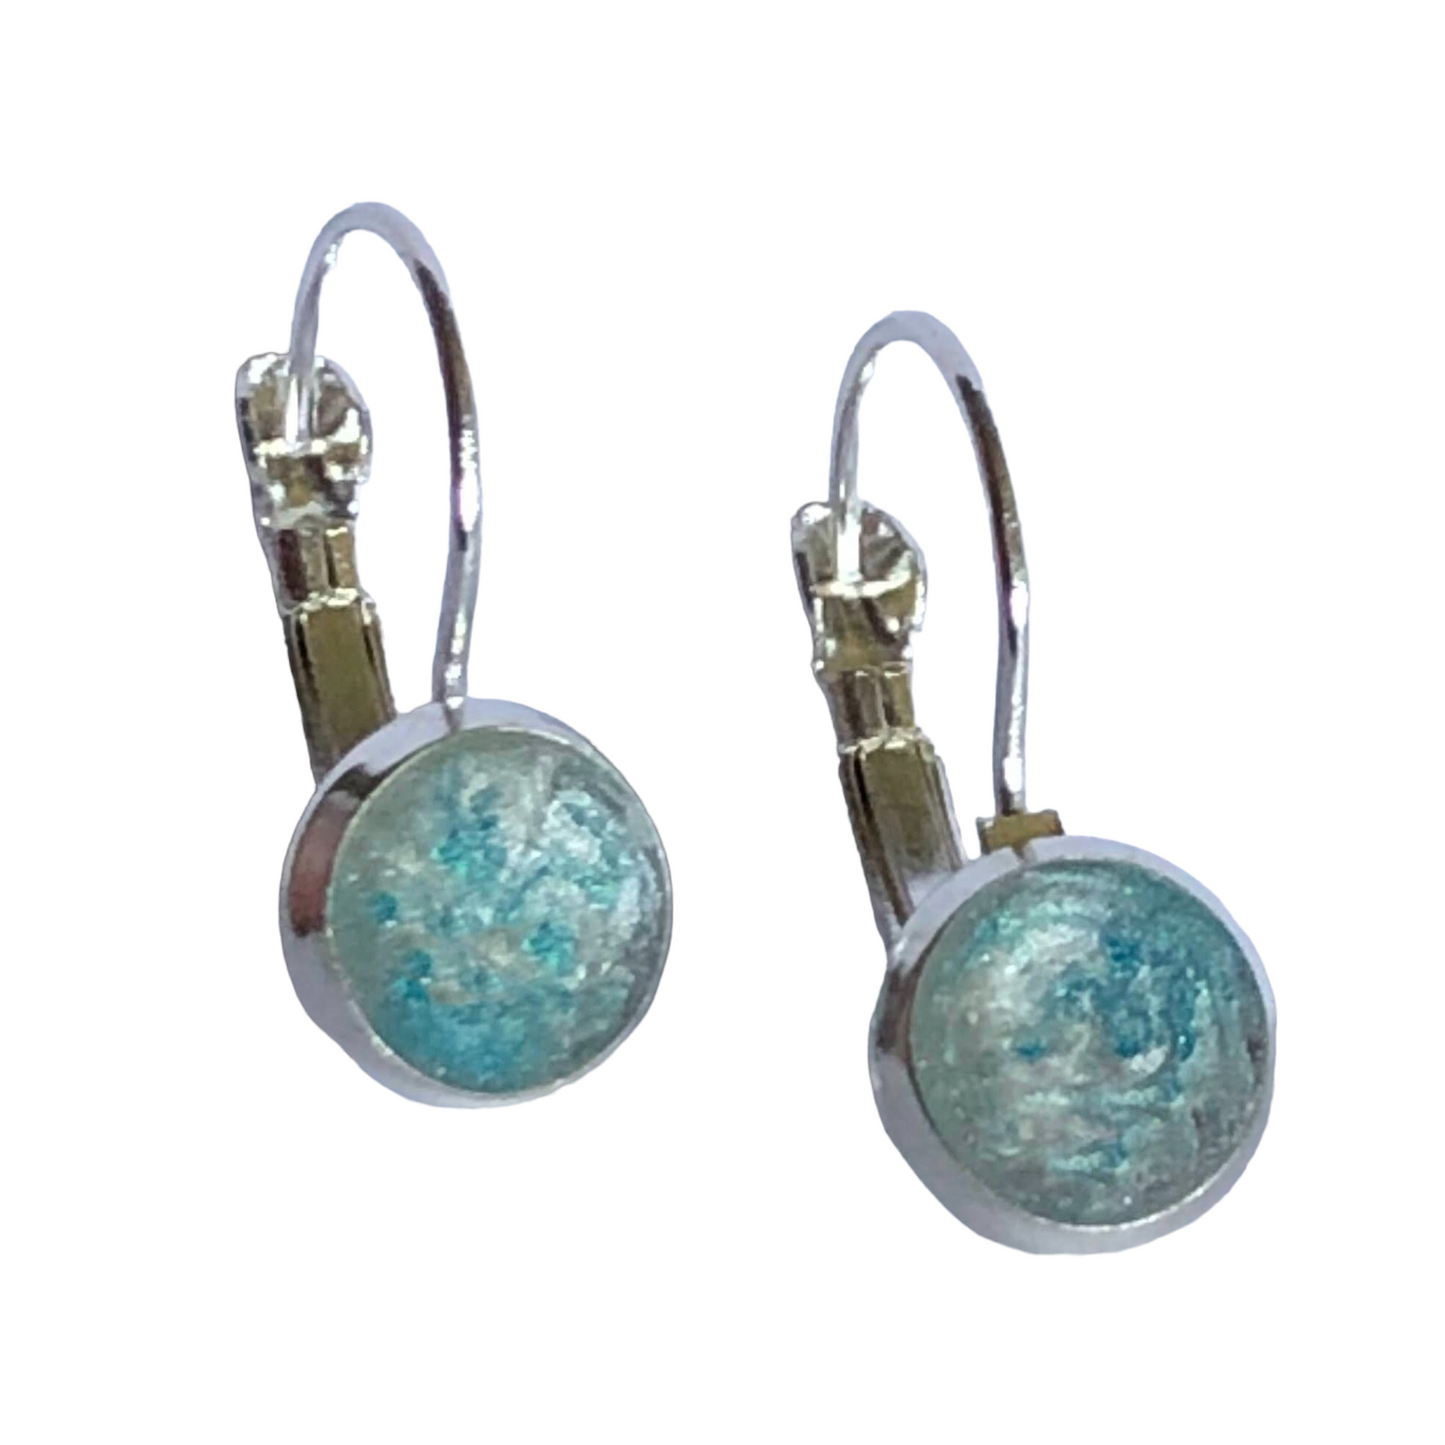 Cremation Earrings, Handmade Cremation Jewelry, Pet Cremation Jewelry, Cremate Jewelry, Ashes Earrings - Ash Urn & Sea 